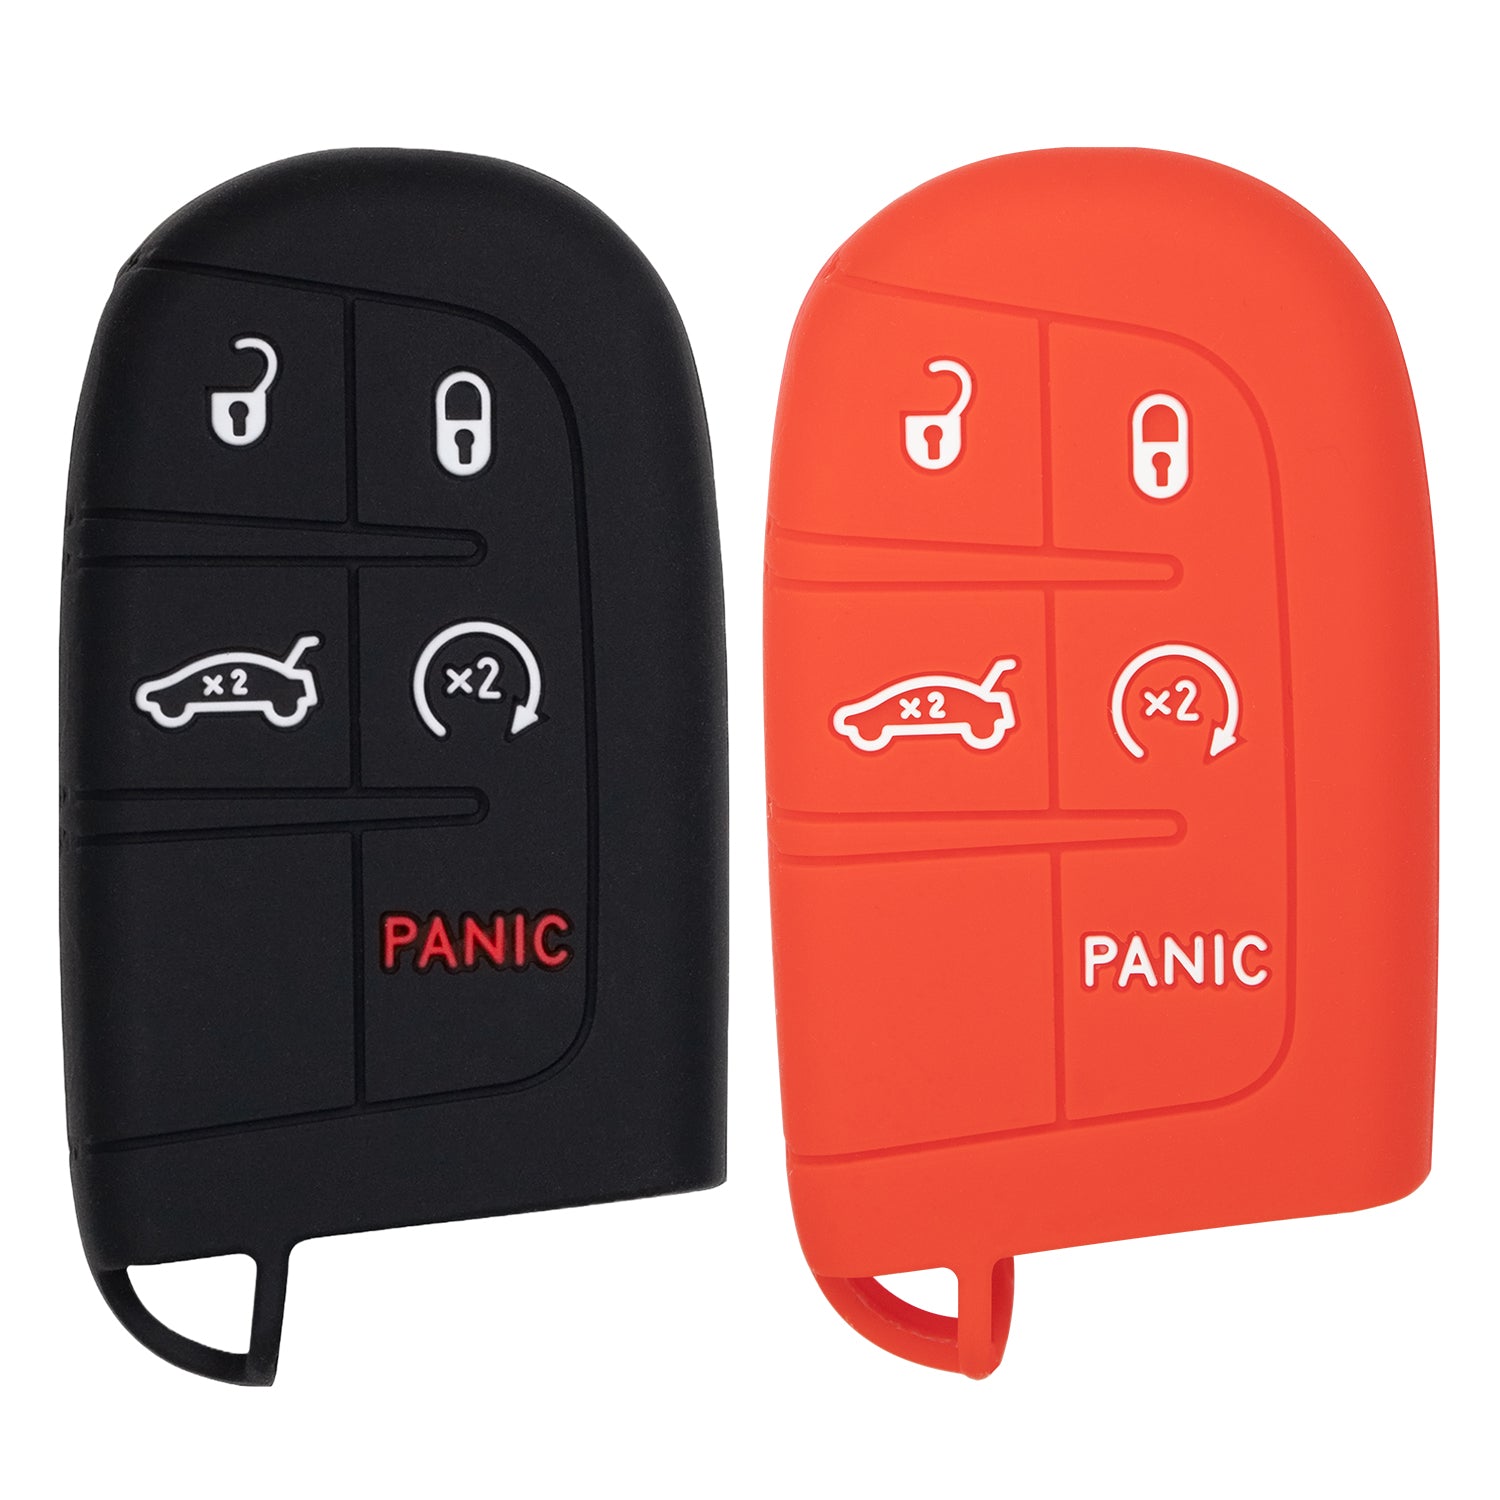 Silicone Case for Keyless Entry Smart Key fob for Jeep Grand Cherokee Compass Journey Durango (Black and Red)